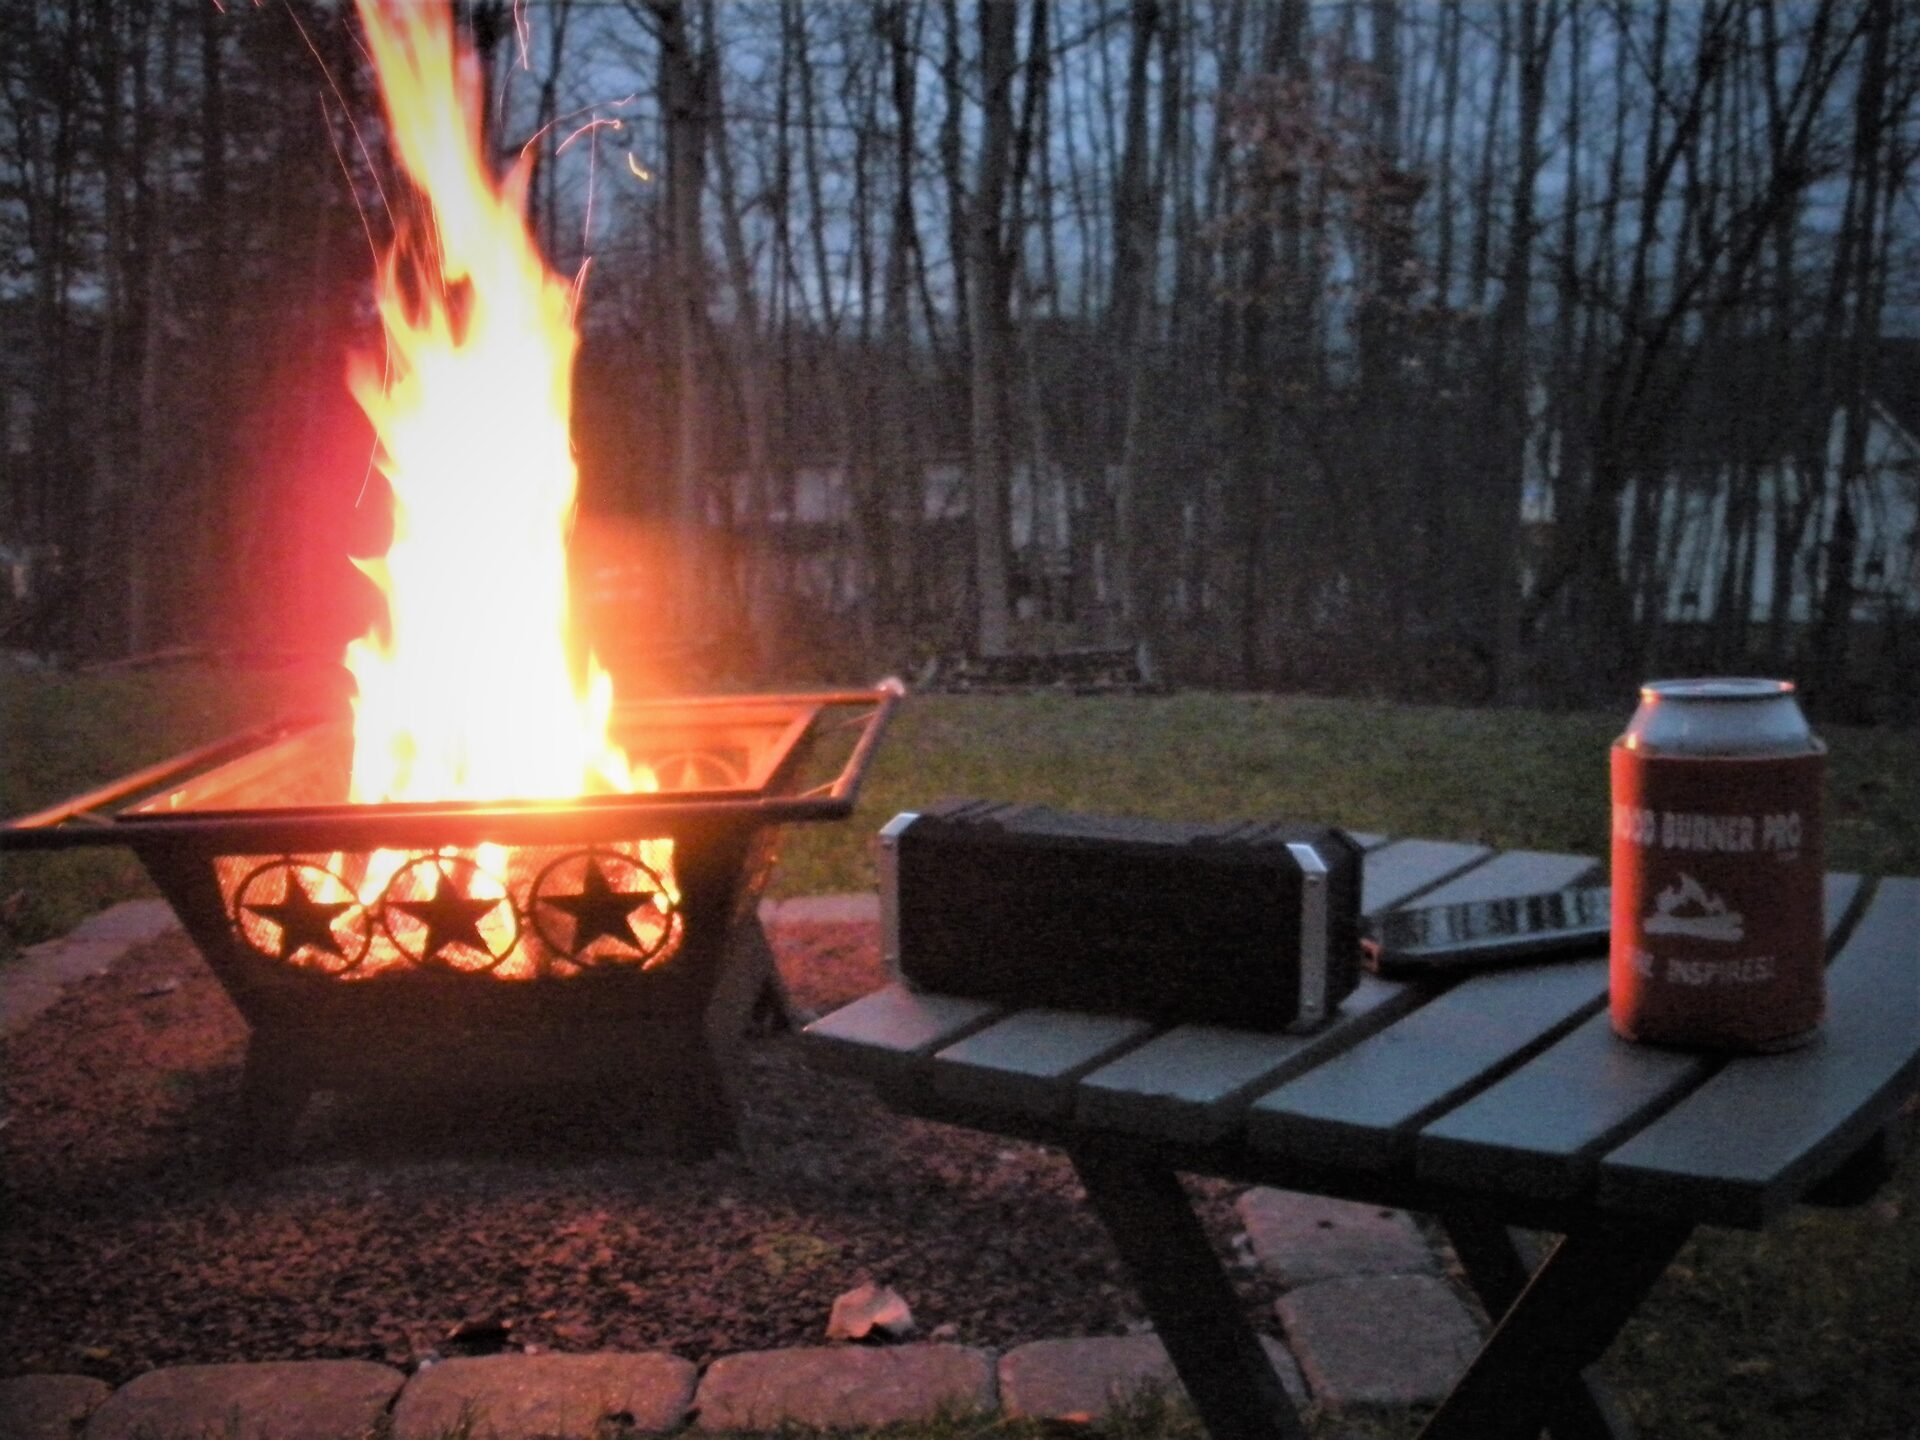 portable speaker, MP3 player and canned beverage on table outdoors by firepit